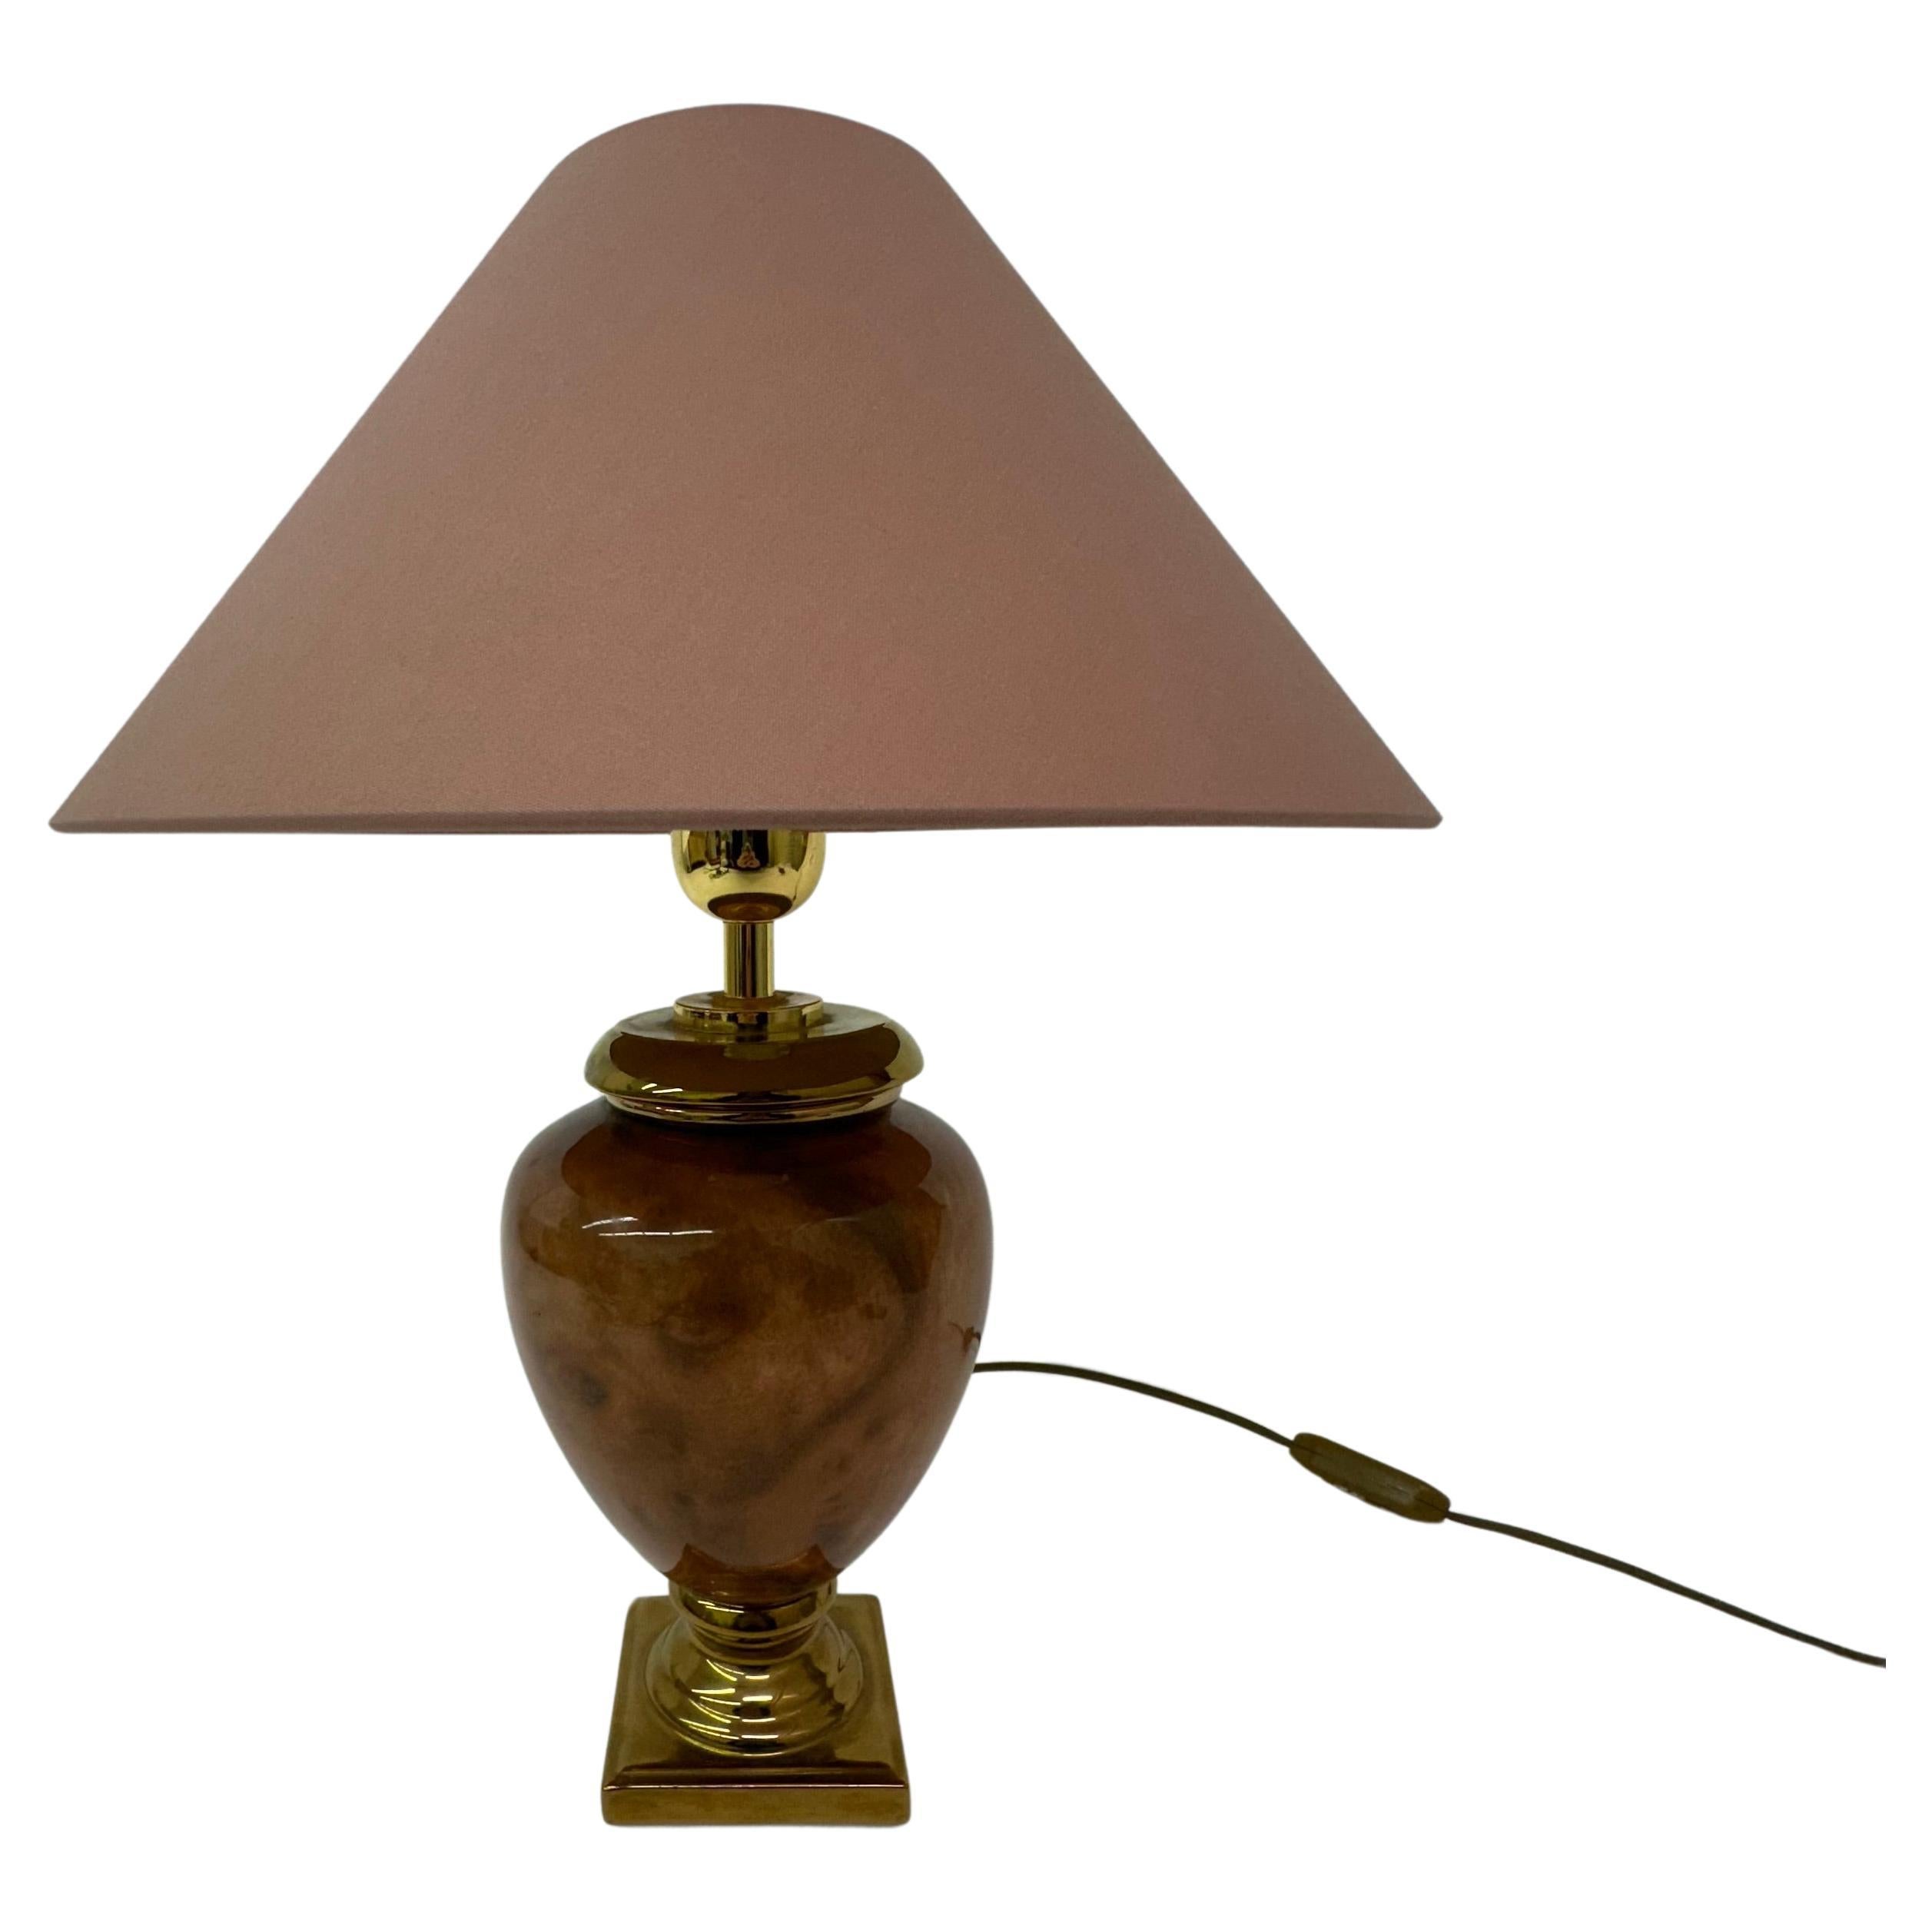 Vintage ceramic table lamp by Bosa , 1980’s , Italy